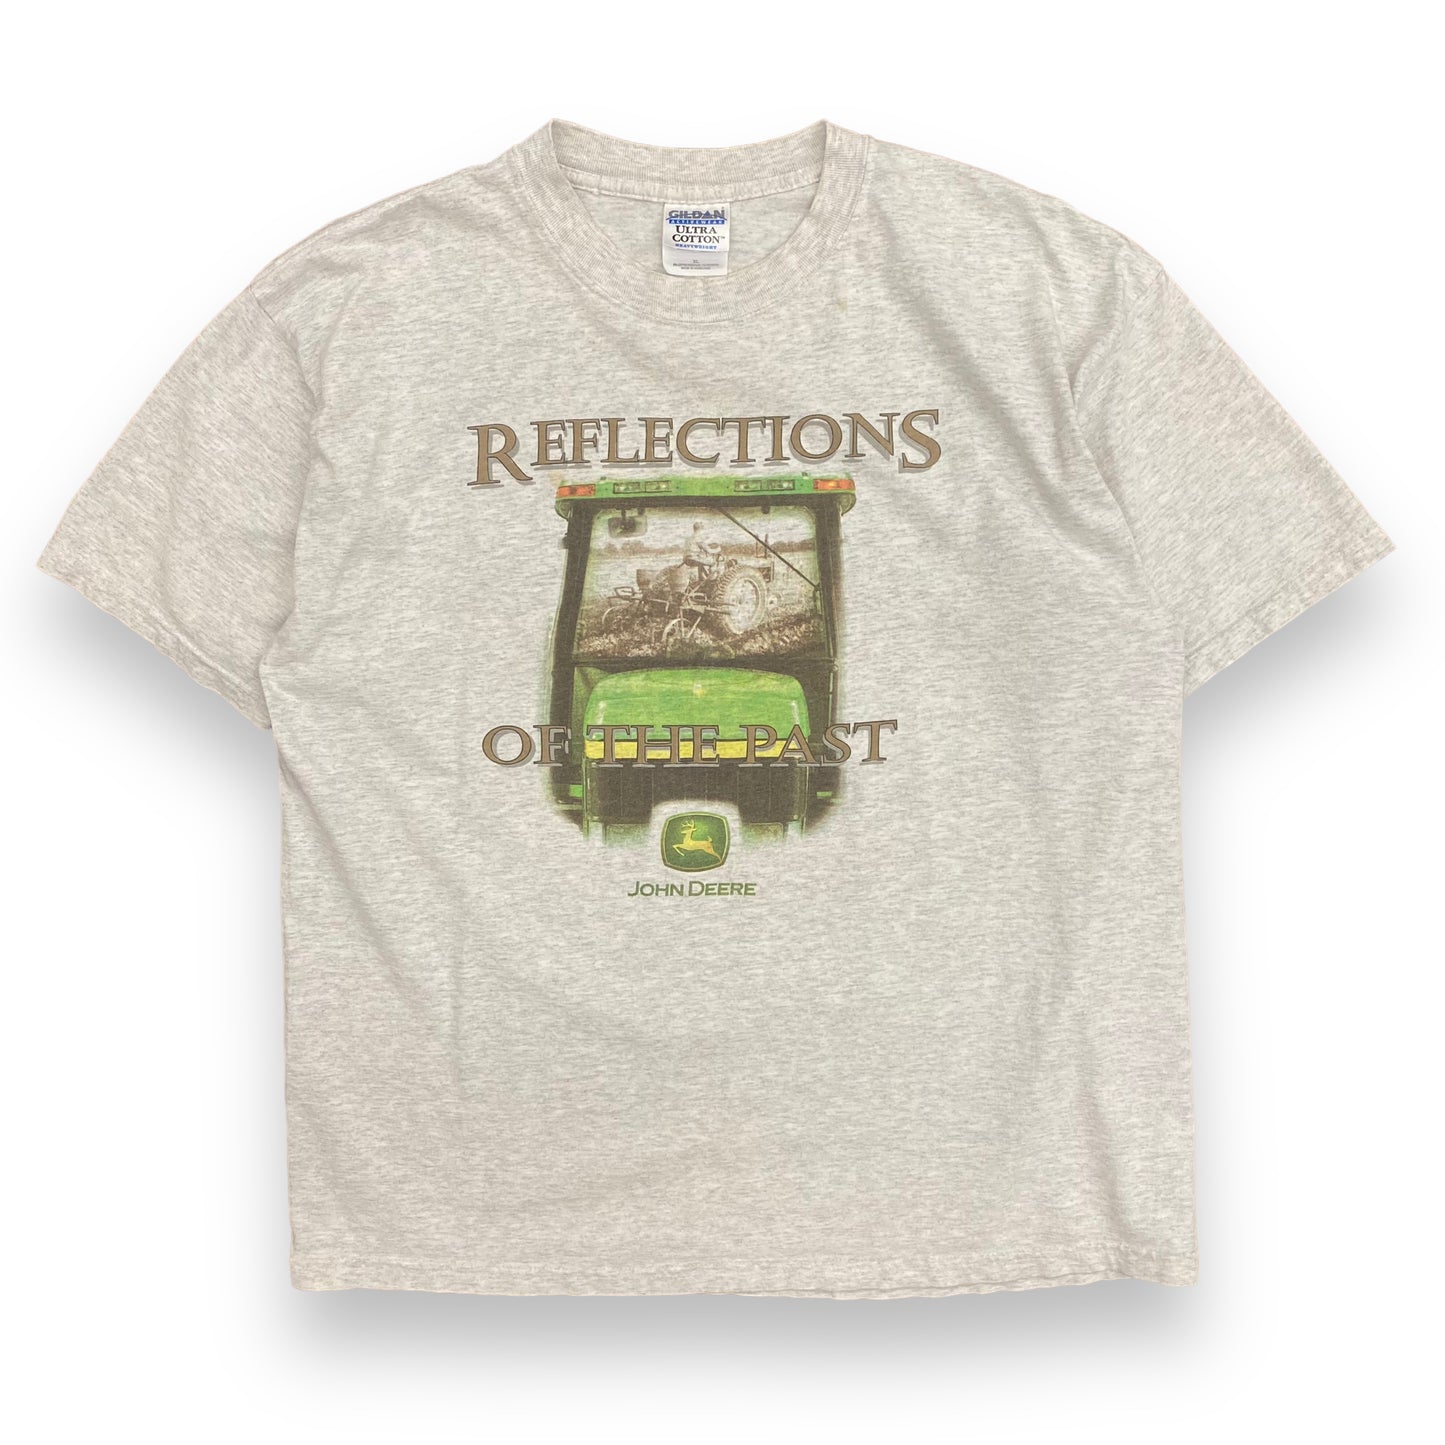 Early 2000s John Deere "Reflections of the Past" Tee - Size XL